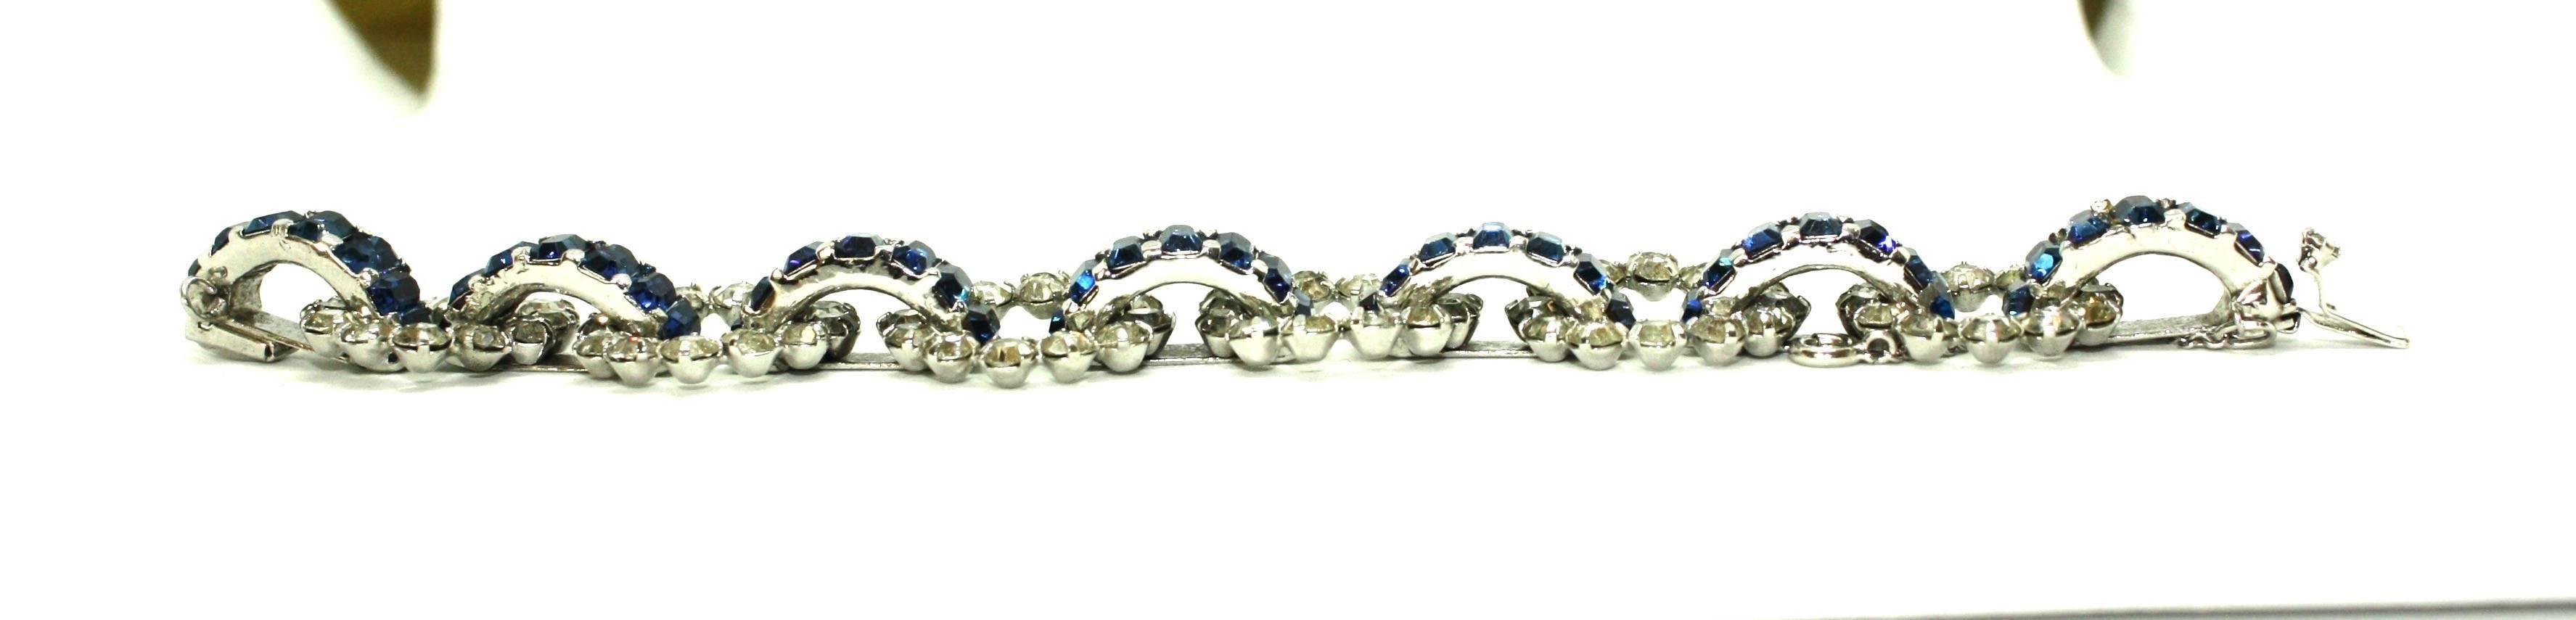 Mitchel Maer for Christian Dior Bracelet 1950's In Good Condition For Sale In Rushden, GB